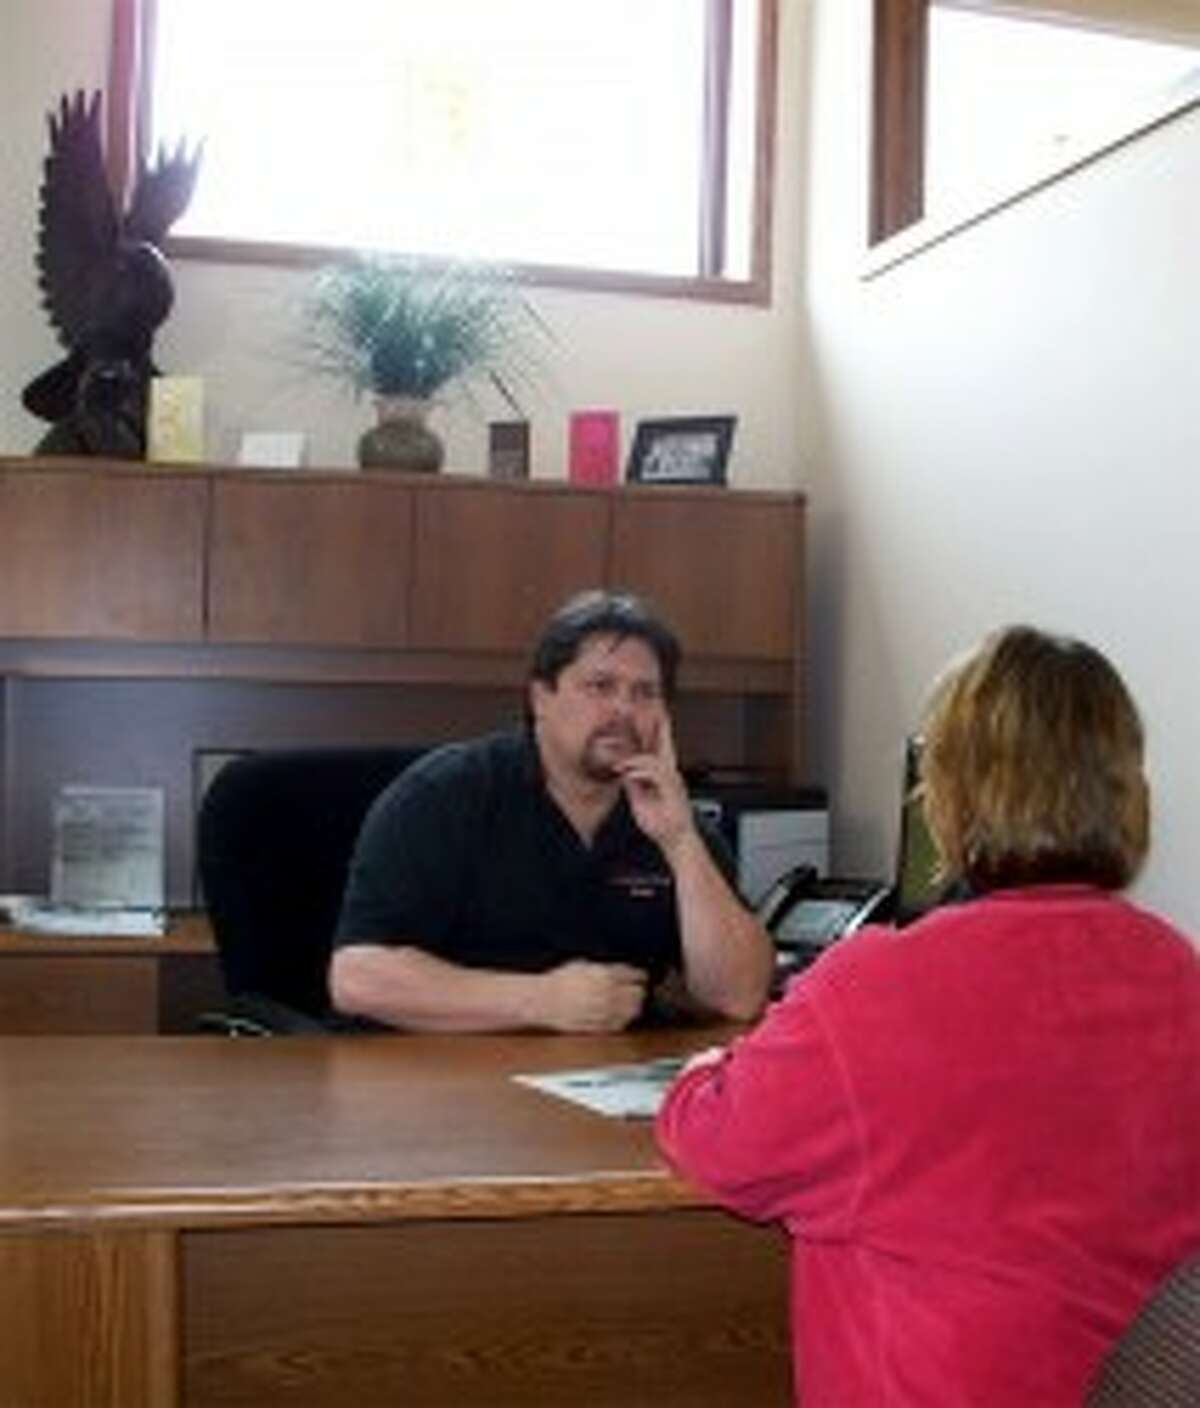 LAKE AND LODGE: Realtor Randy Ostrander listens to a client’s questions at his downtown Big Rapids office. Ostrander earned his Realtor’s license in 2008. (Courtesy photo)